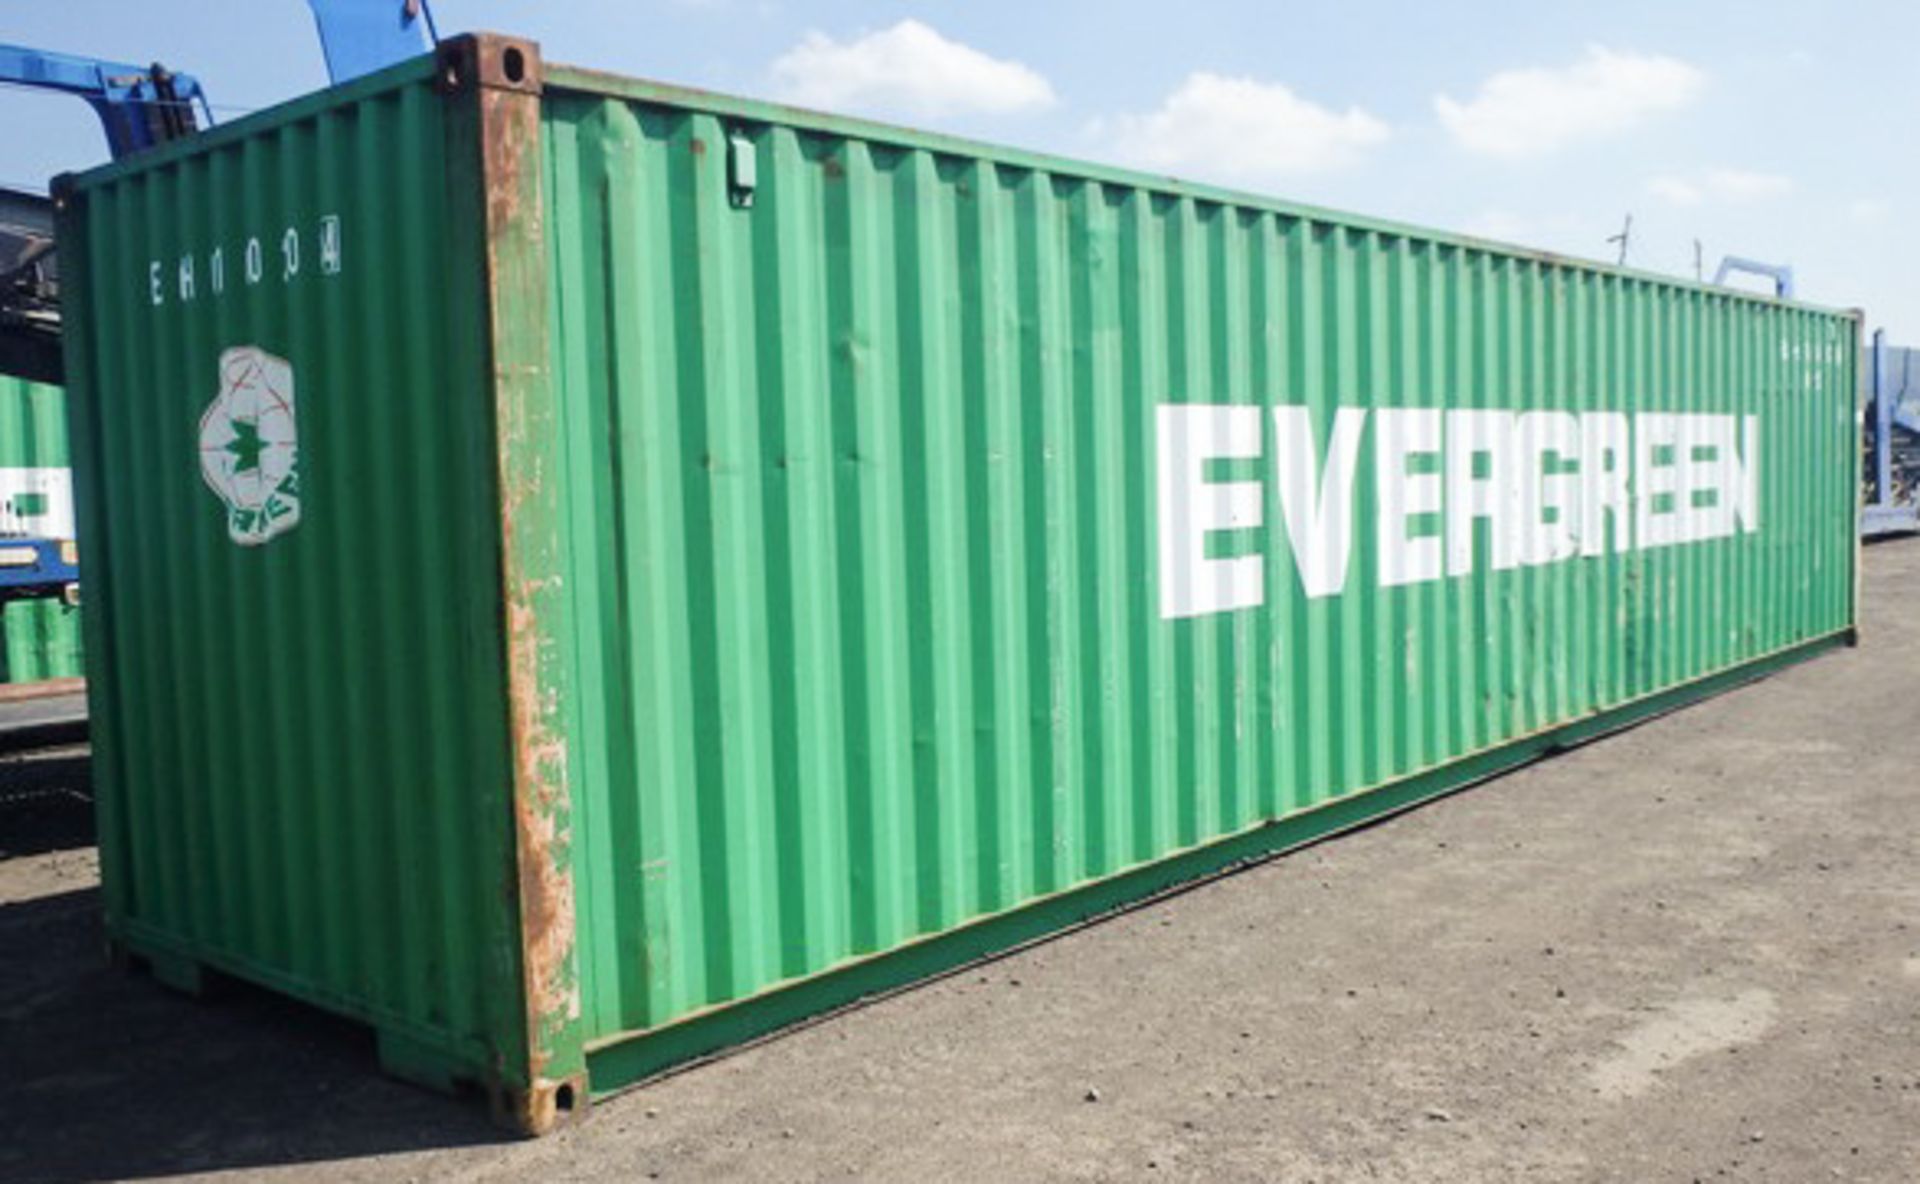 2008 USED 40 X 8 X 8 SHIPPING CONTAINER, S/N EGHU1002084 - Image 2 of 7